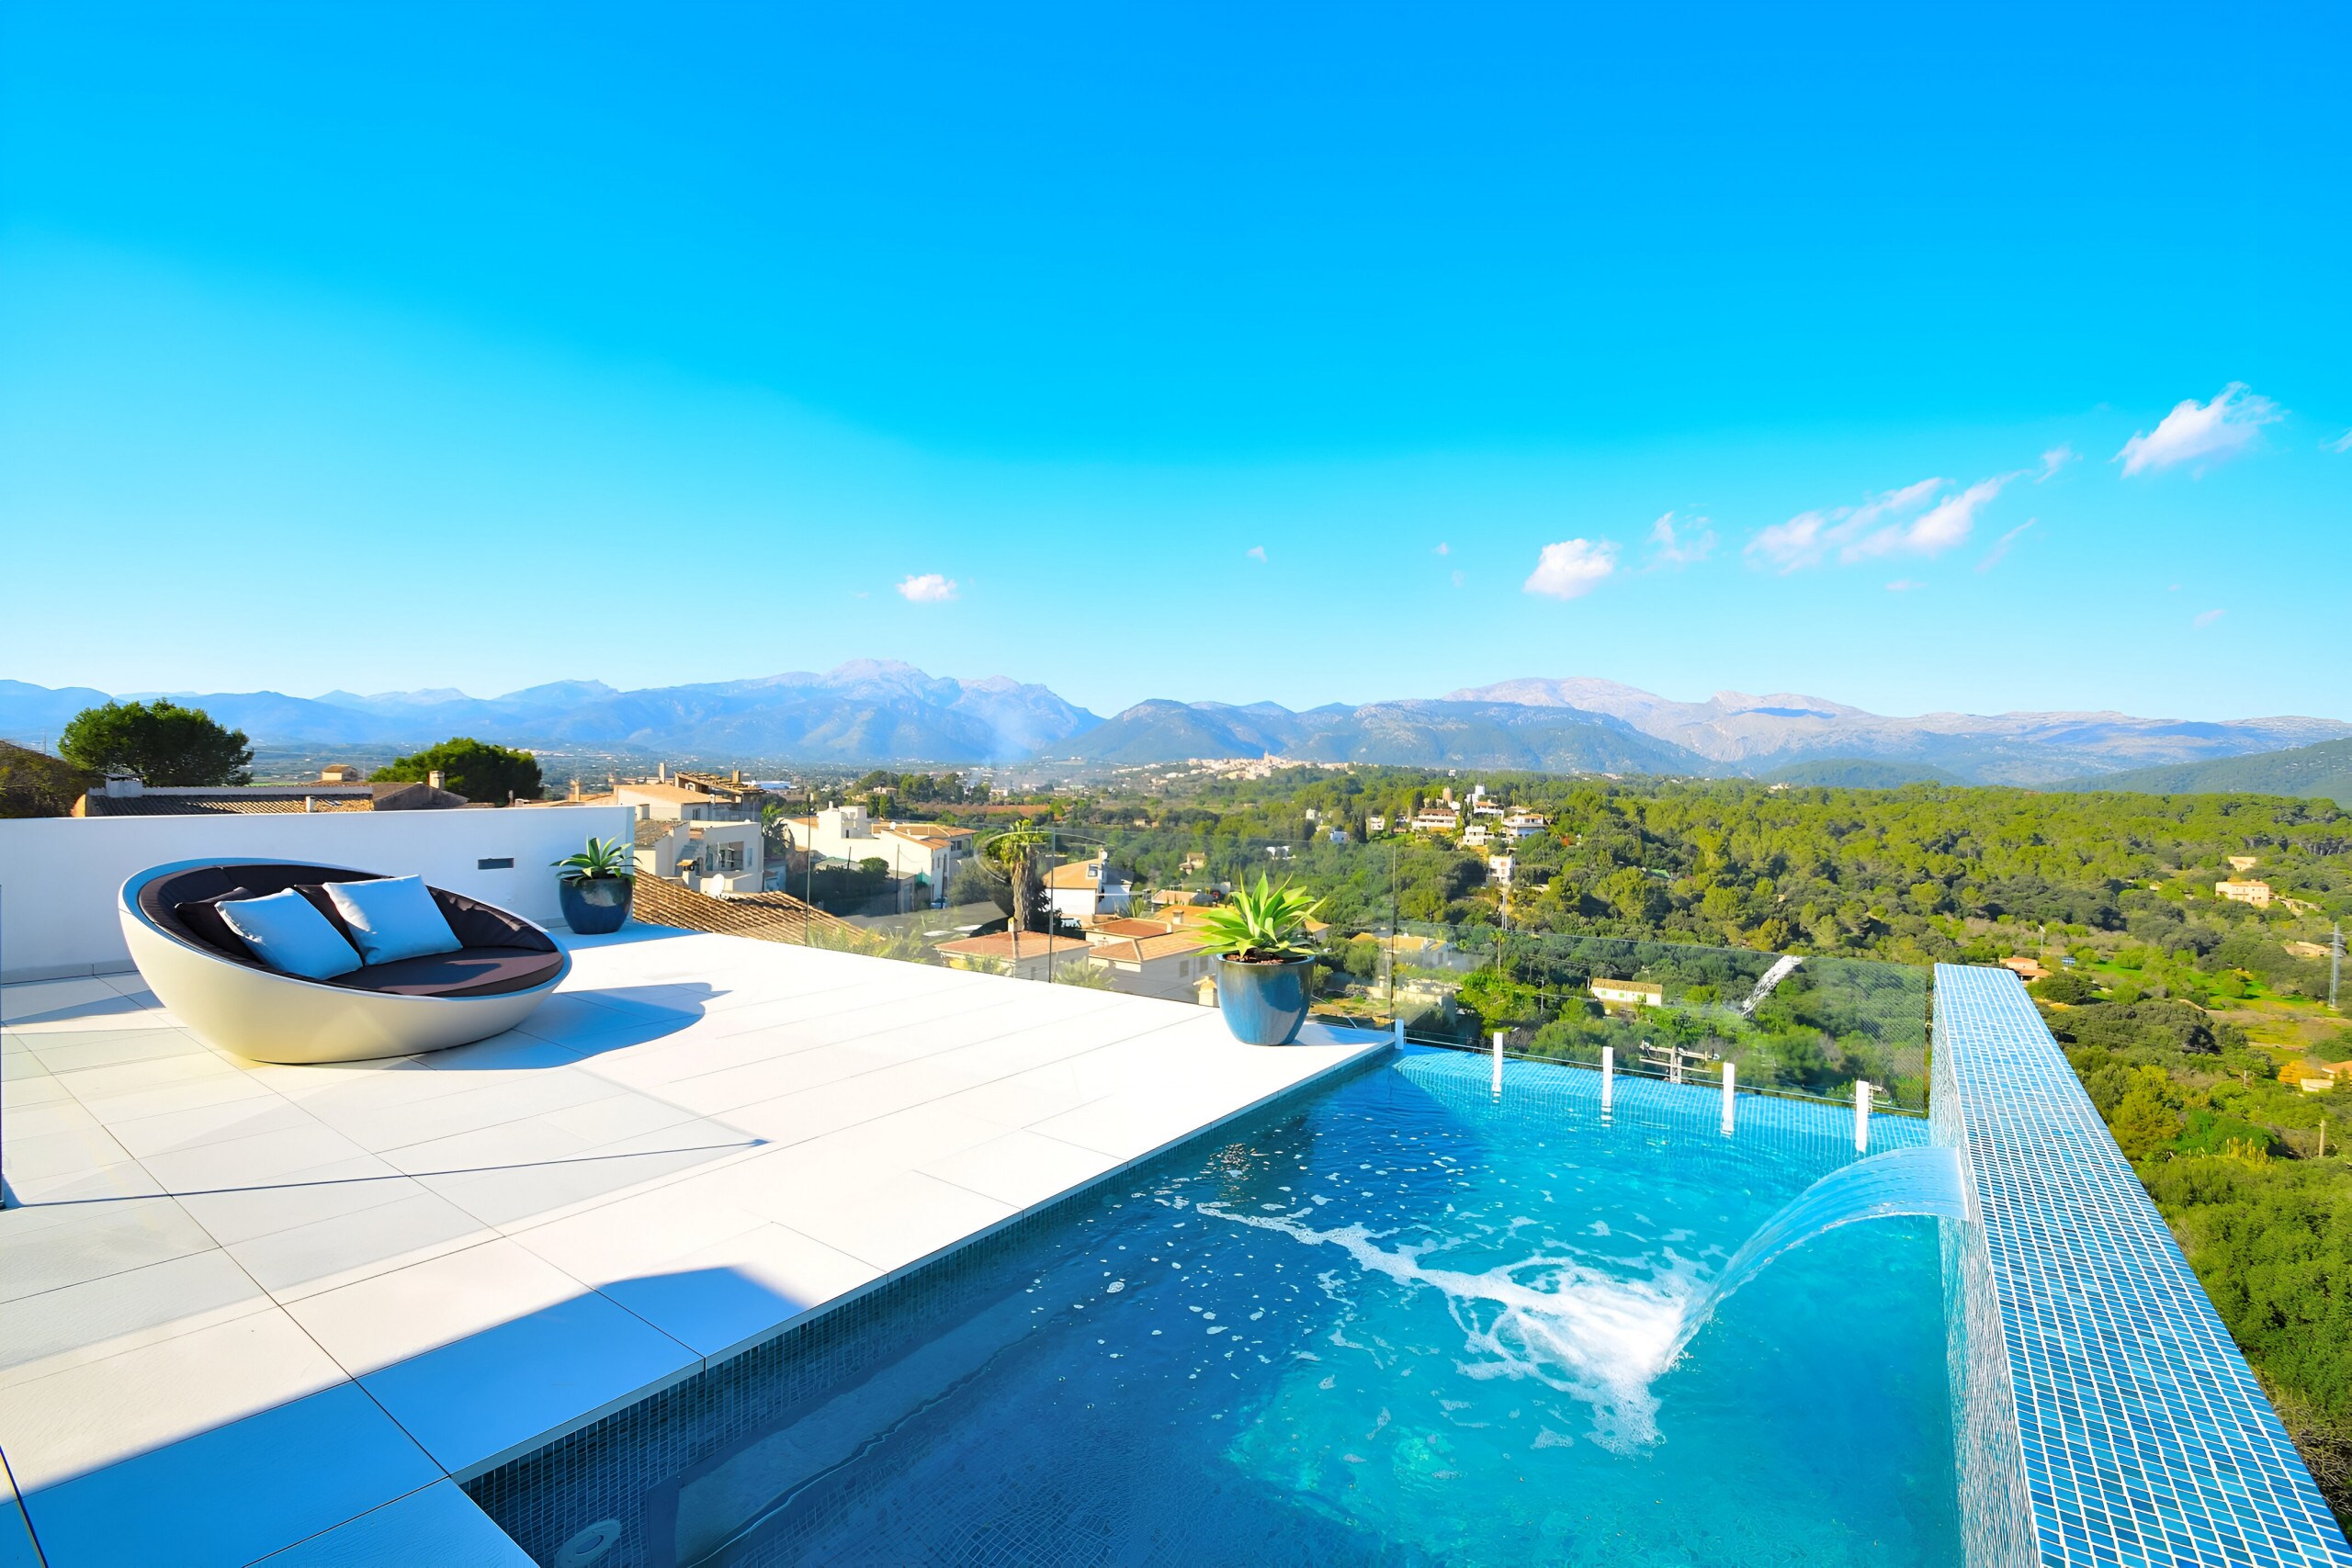 Luxury villa with pool and views of the whole of Mallorca